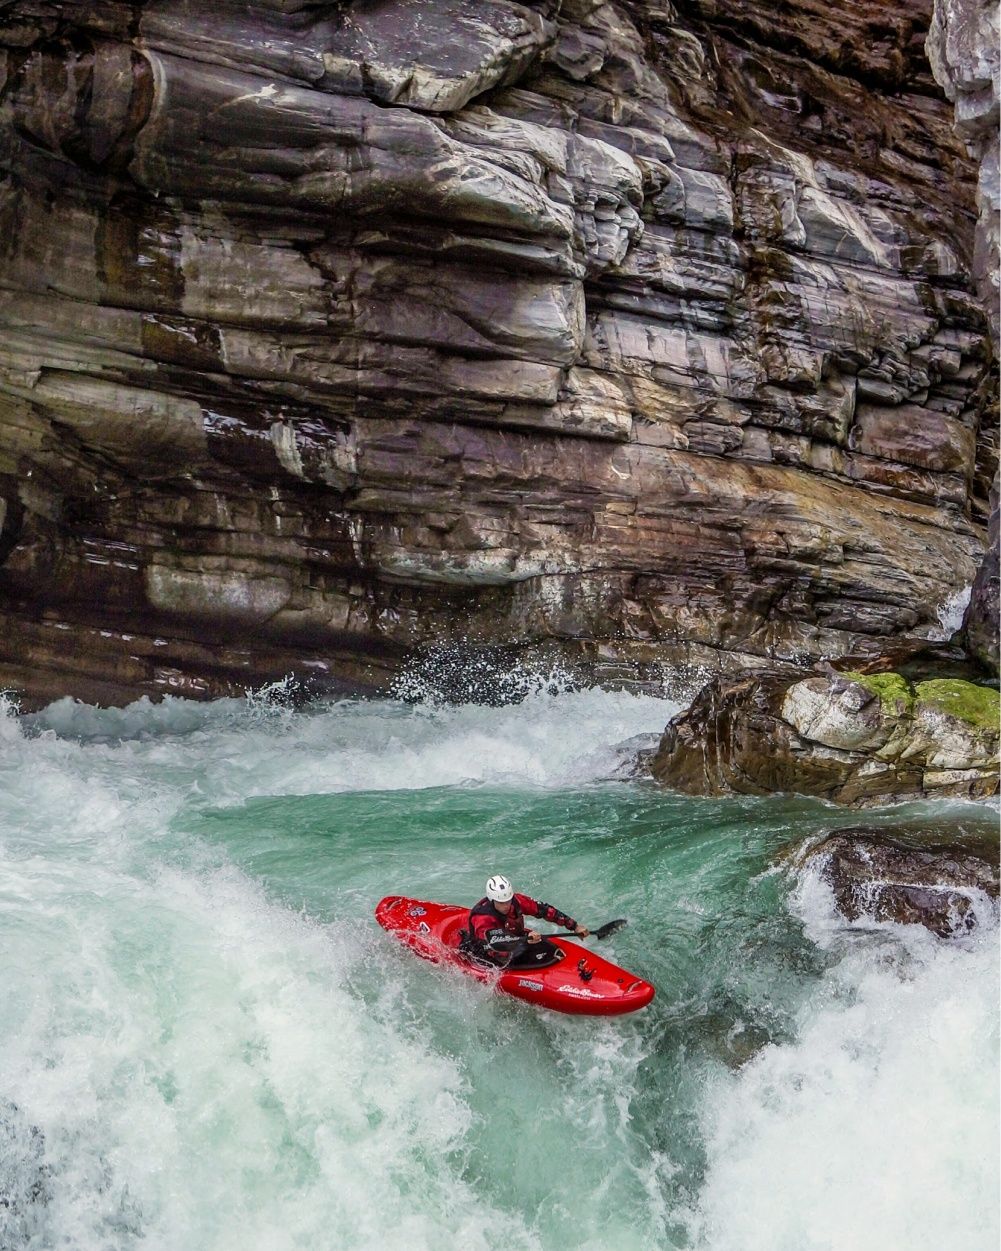 Pedro Oliva paddles in white water through a canyon.